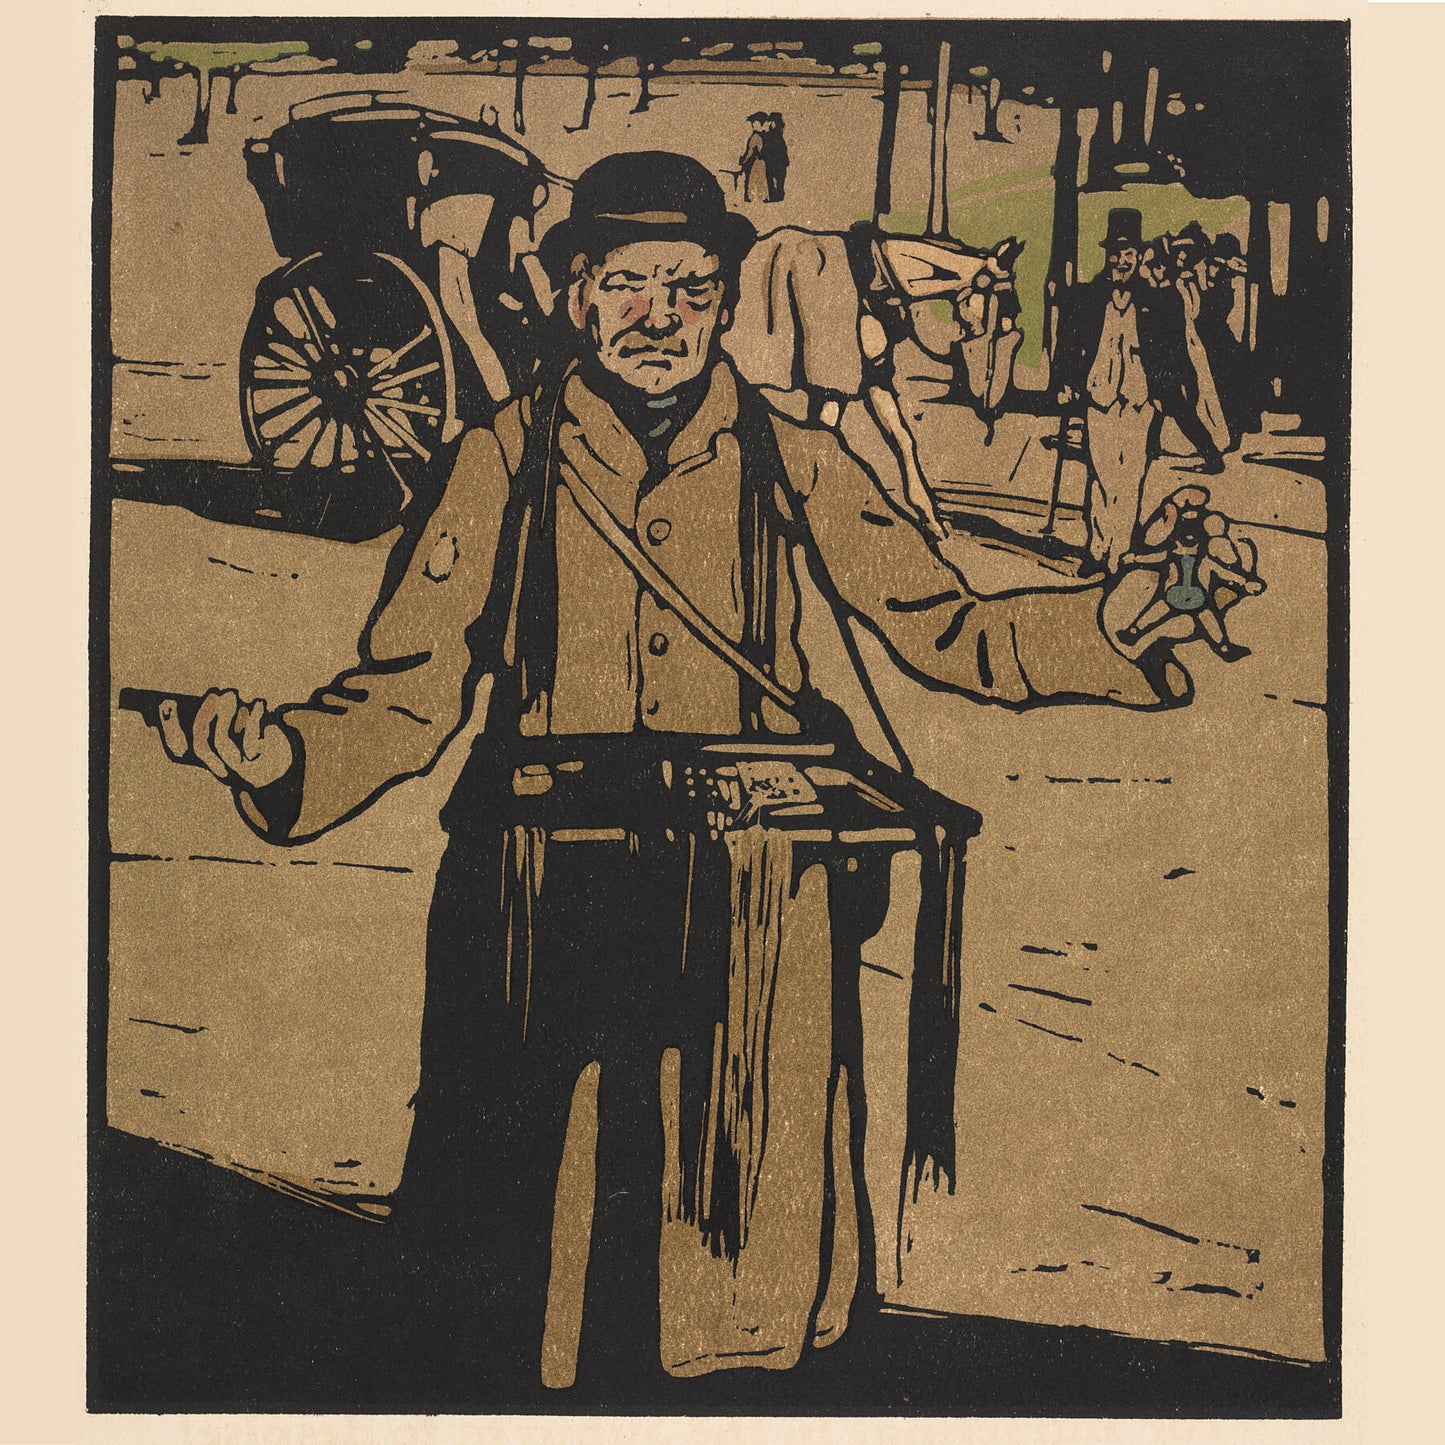 London Types : Hawker by William Nicholson - 1898.  Printmaker William Nicholson worked in partnership with his brother-in-law James Pryde, under the pseudonym the Beggarstaf Brothers.